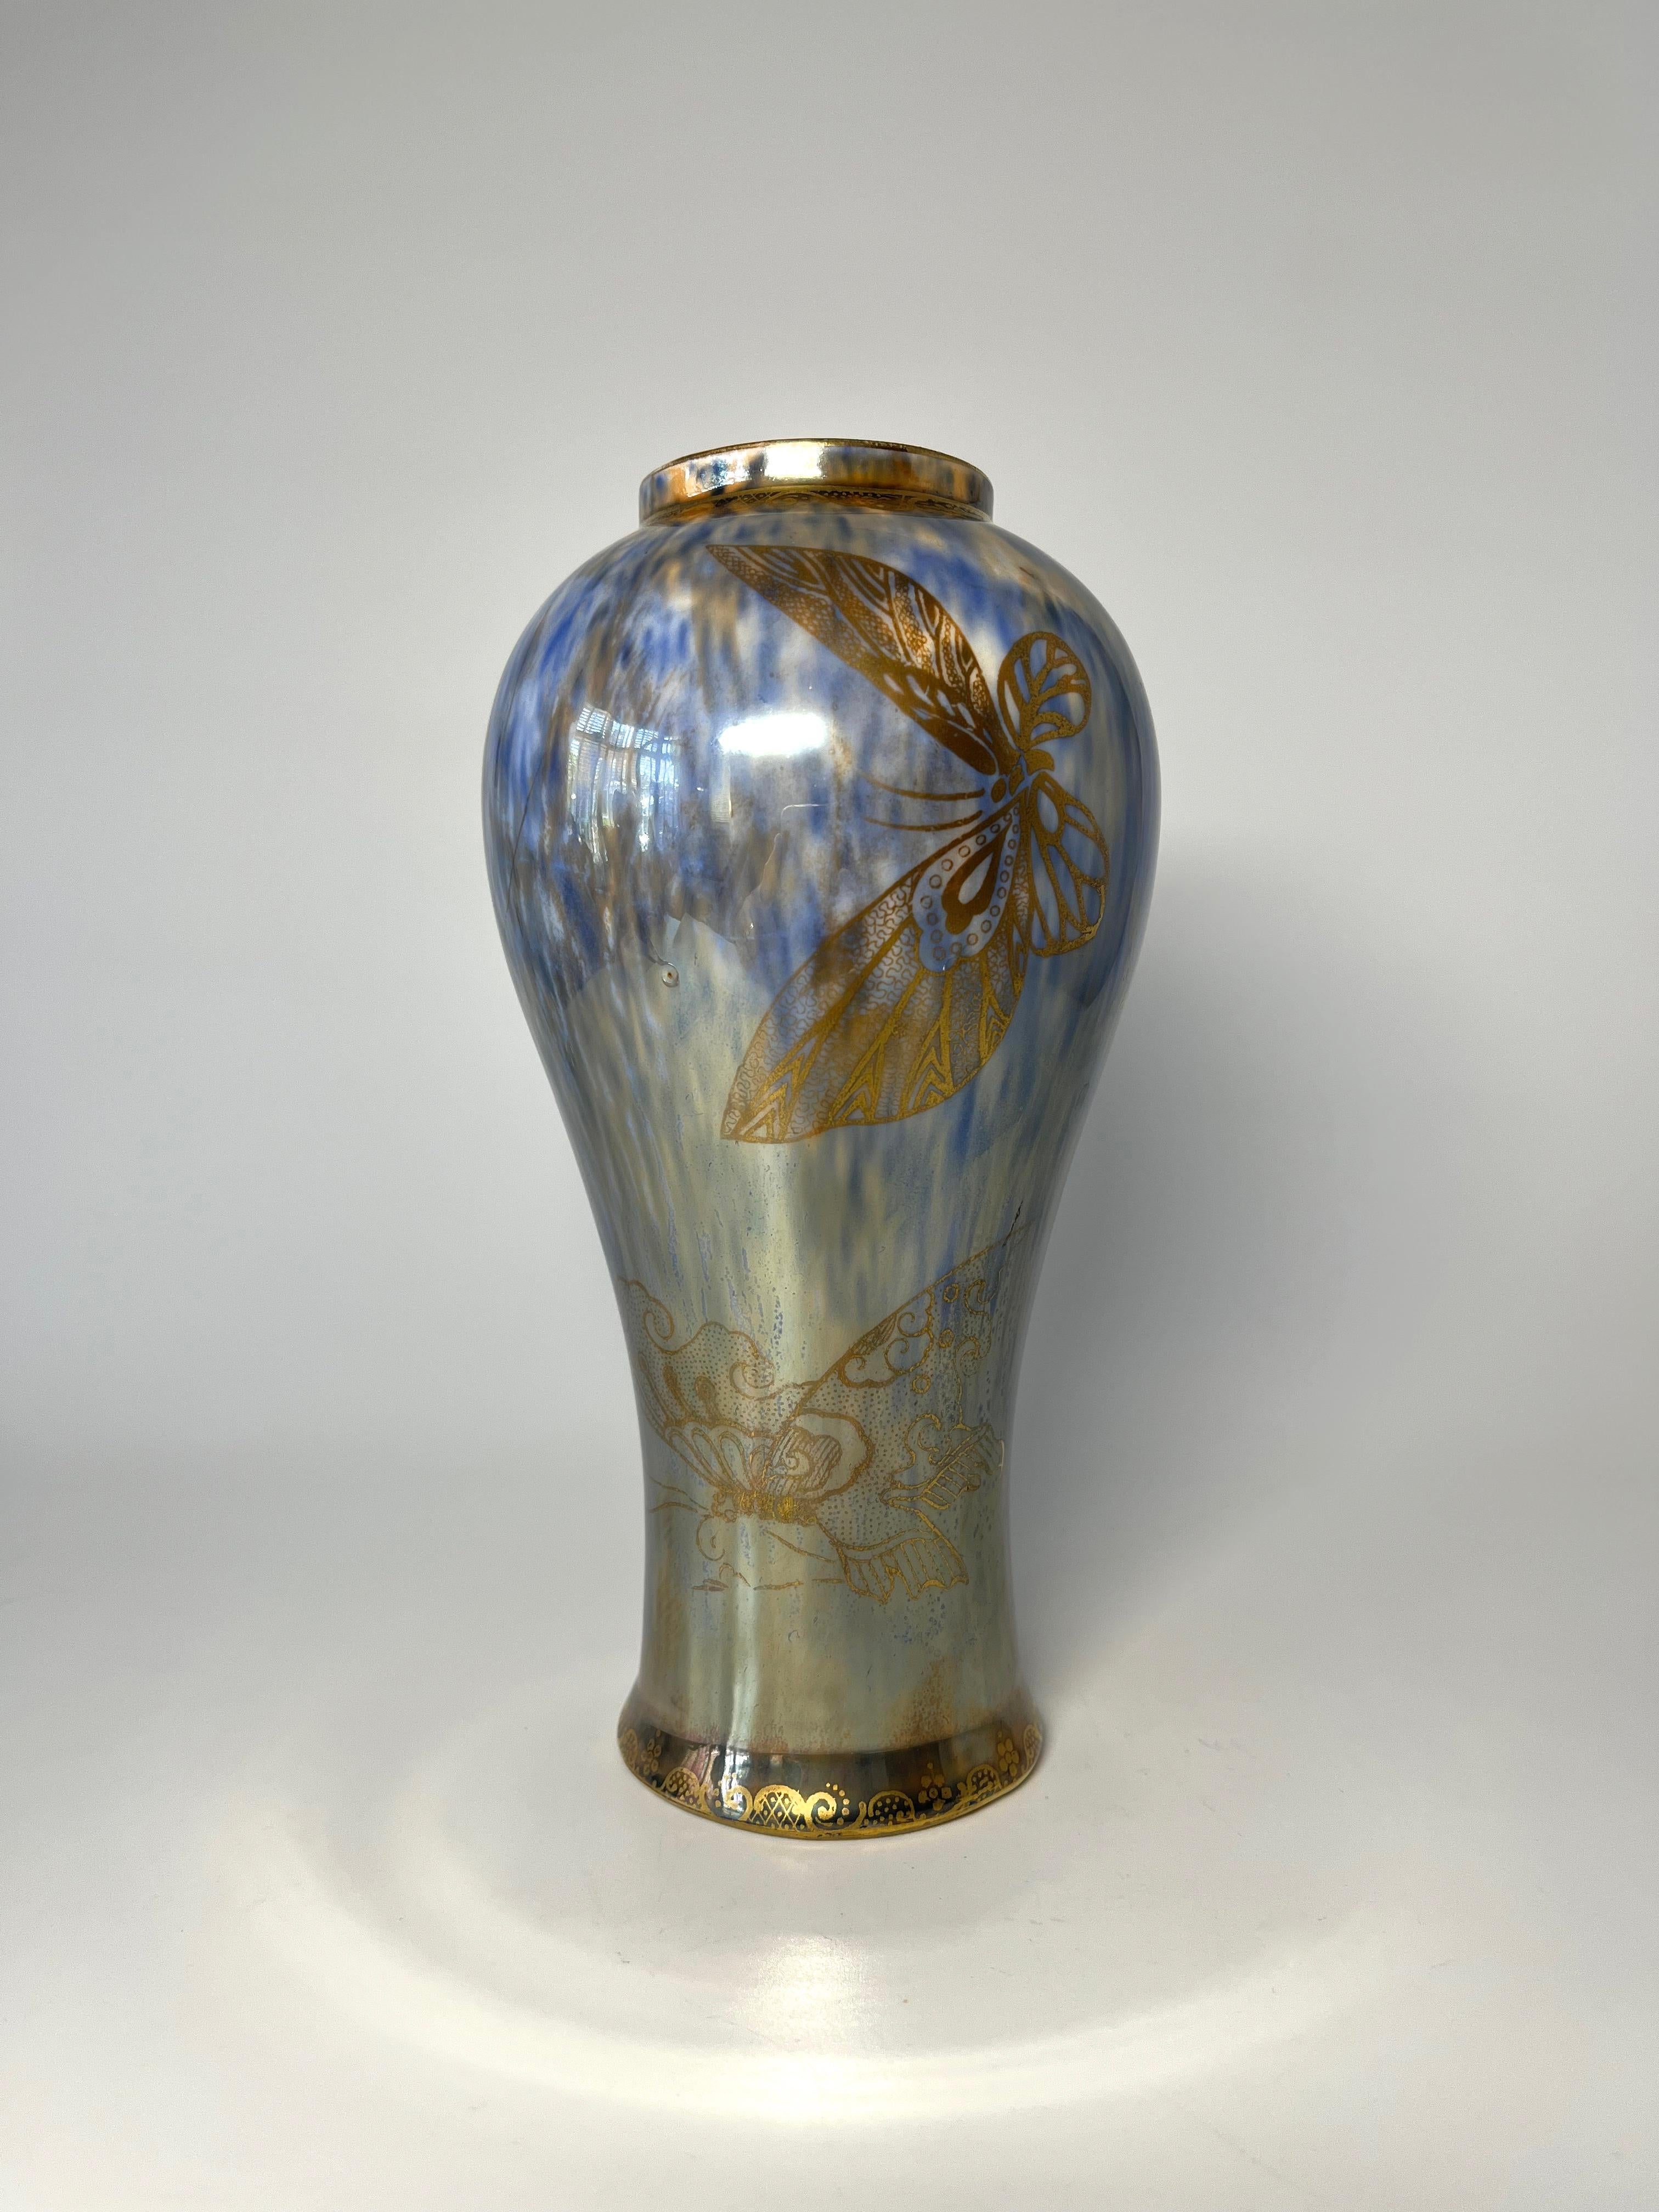 A stunning Wedgwood vase with a glaze reminiscent of fine gossamer. The sky blue base ground has veil of golden brown mottling, adorned with a flutter of gilded butterflies.
Intricate gilded filigree decorates upper and lower rims.
The interior is a